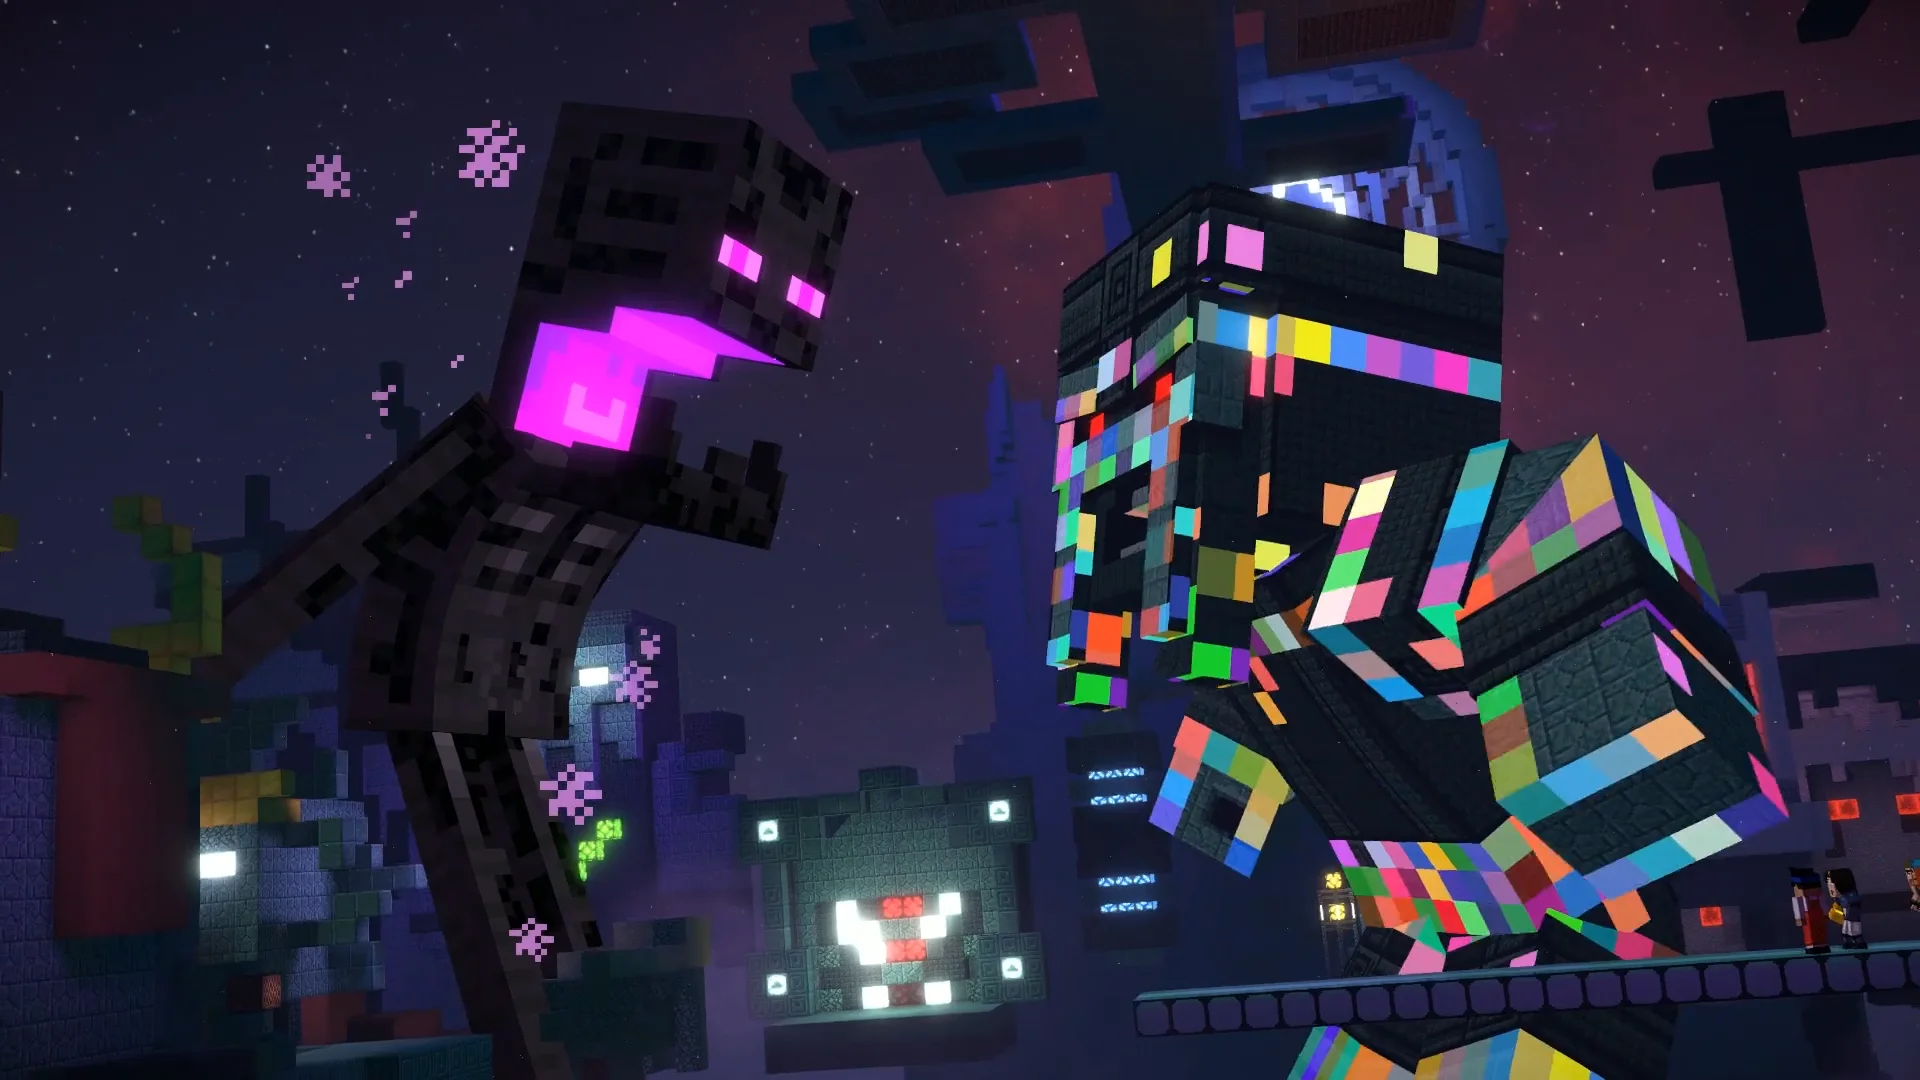 Minecraft: Story Mode' Episode 5 launch trailer released 